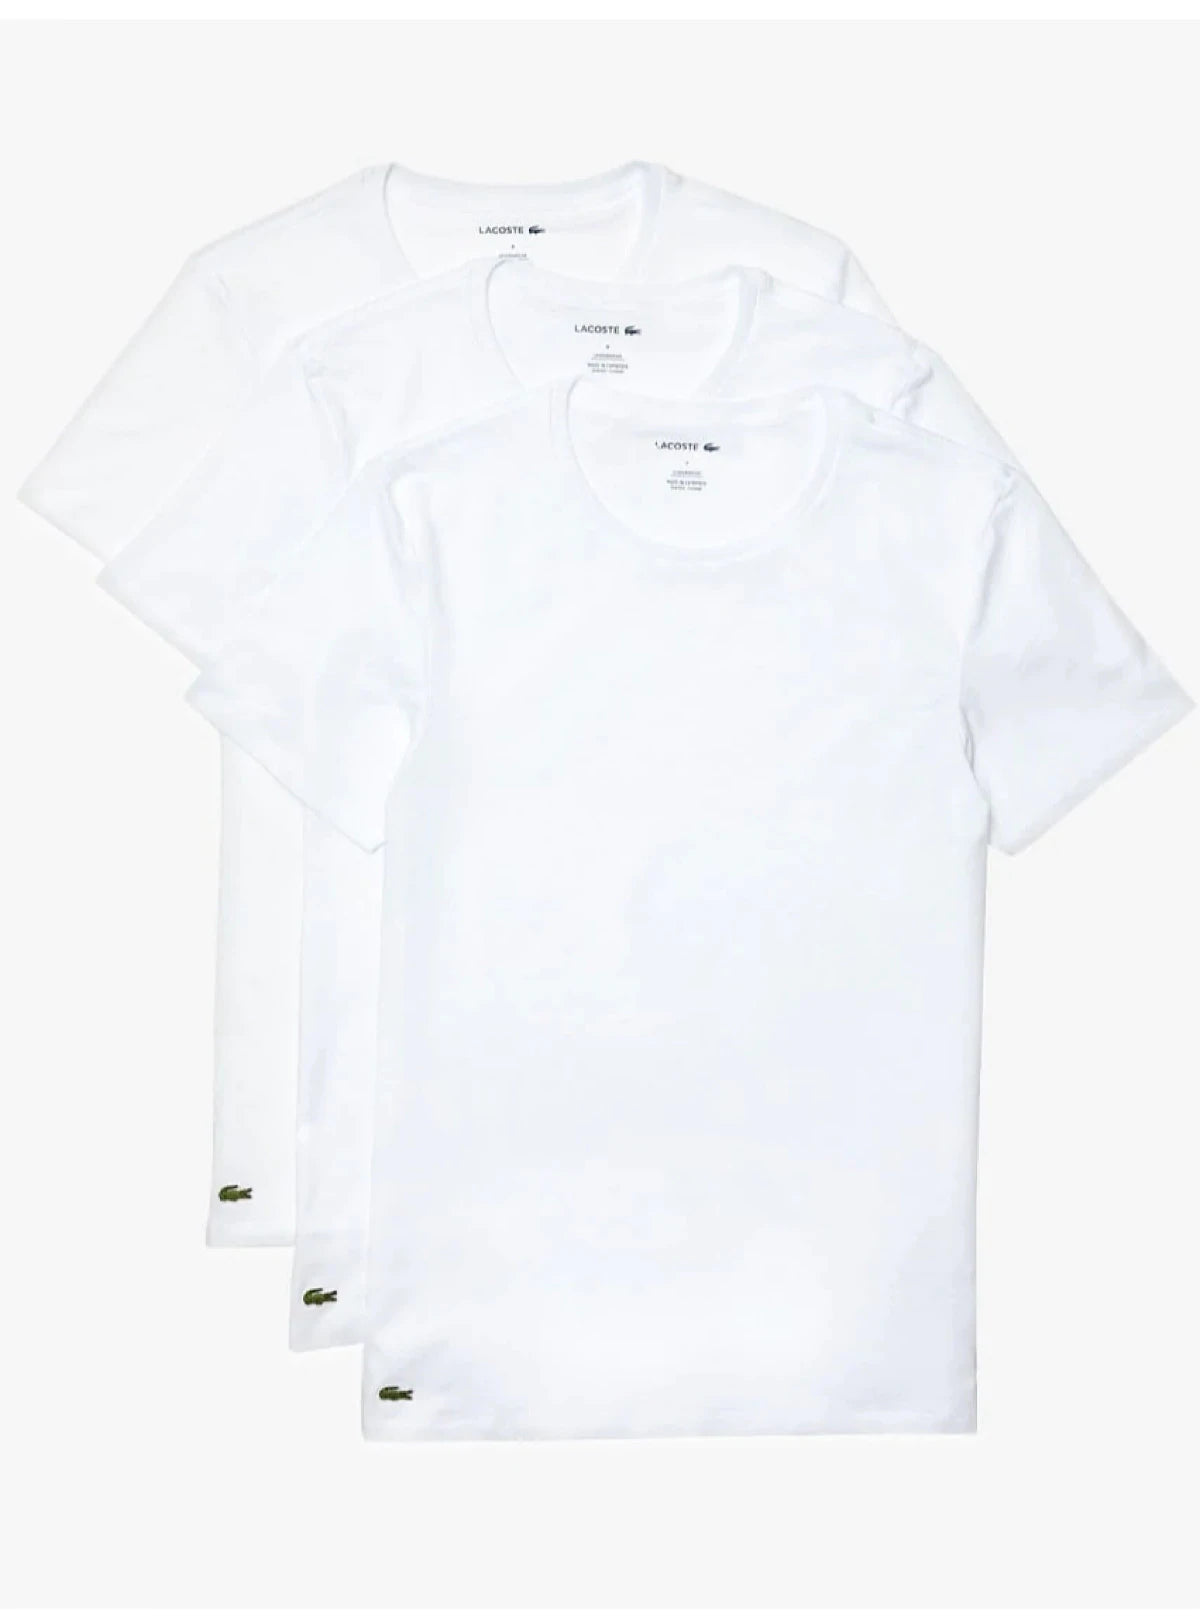 Lacoste T-Shirt - Crew Neck Slim Fit 3-Pack - White - TH3321